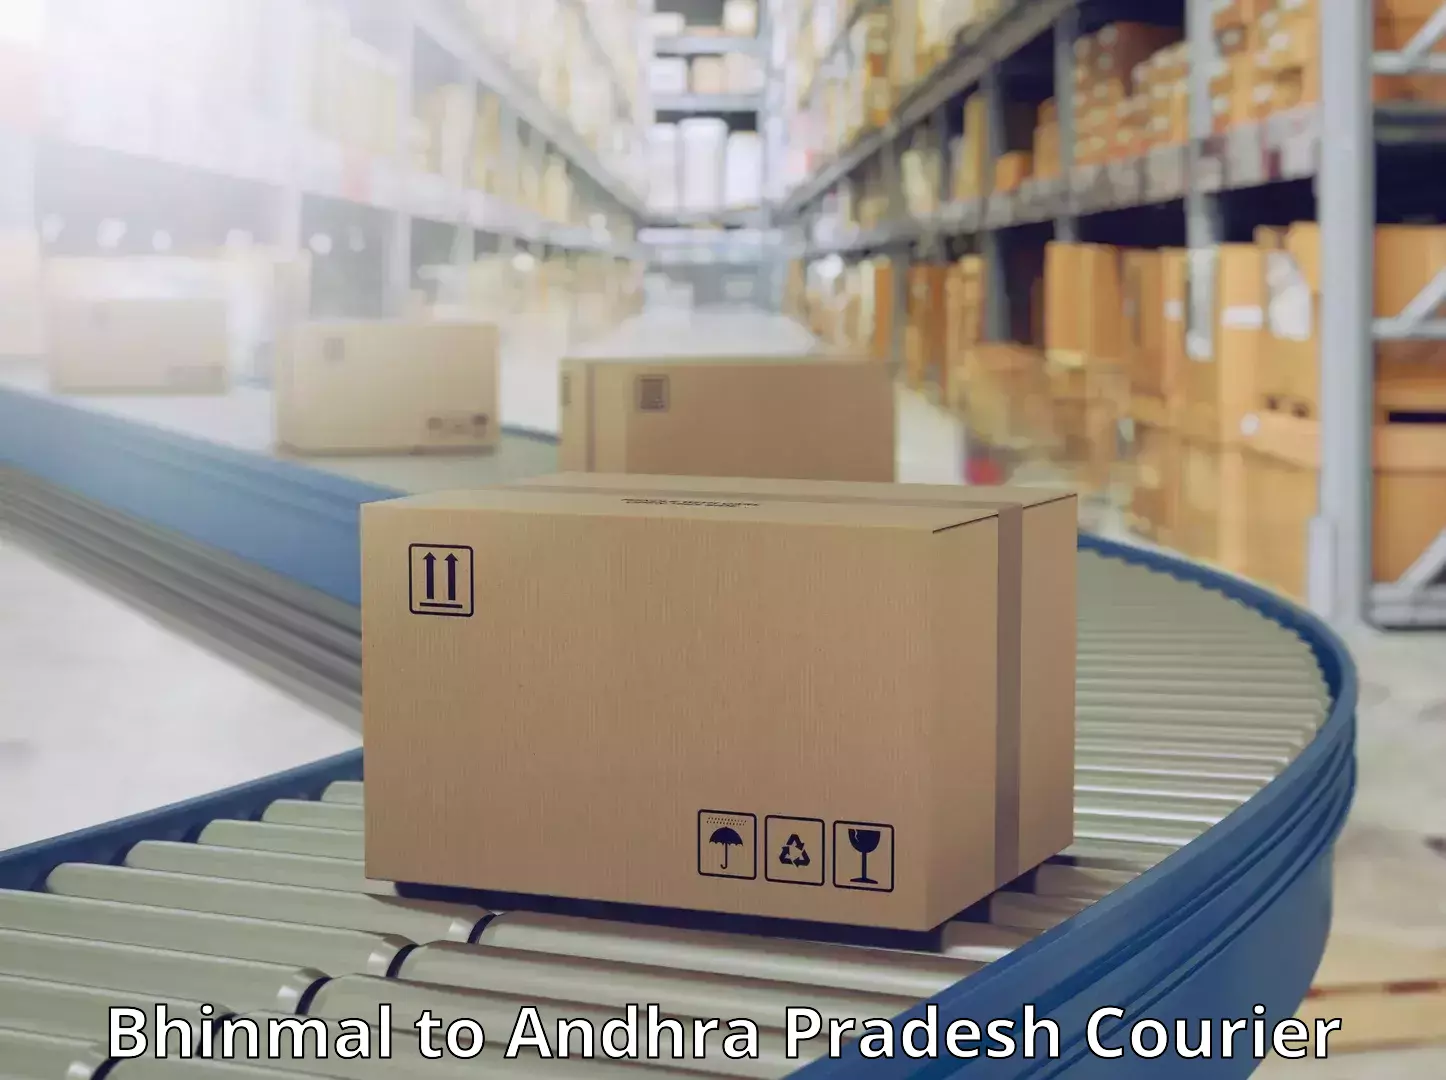 State-of-the-art courier technology Bhinmal to Tadepalligudem